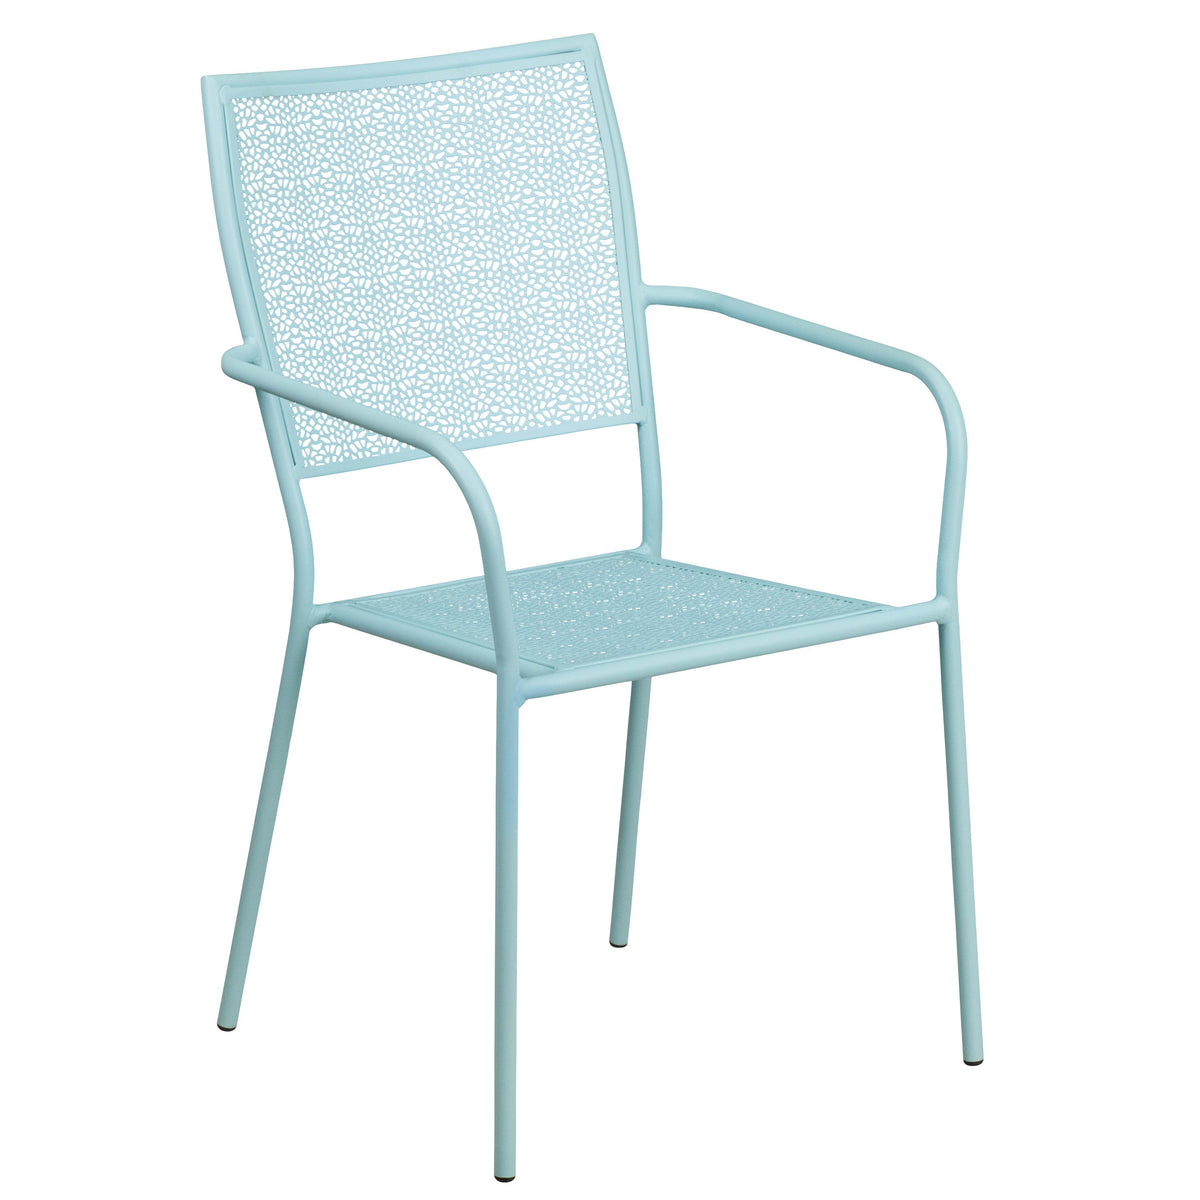 Sky Blue |#| 28inch Square Sky Blue Indoor-Outdoor Steel Patio Table Set - 4 Square Back Chairs